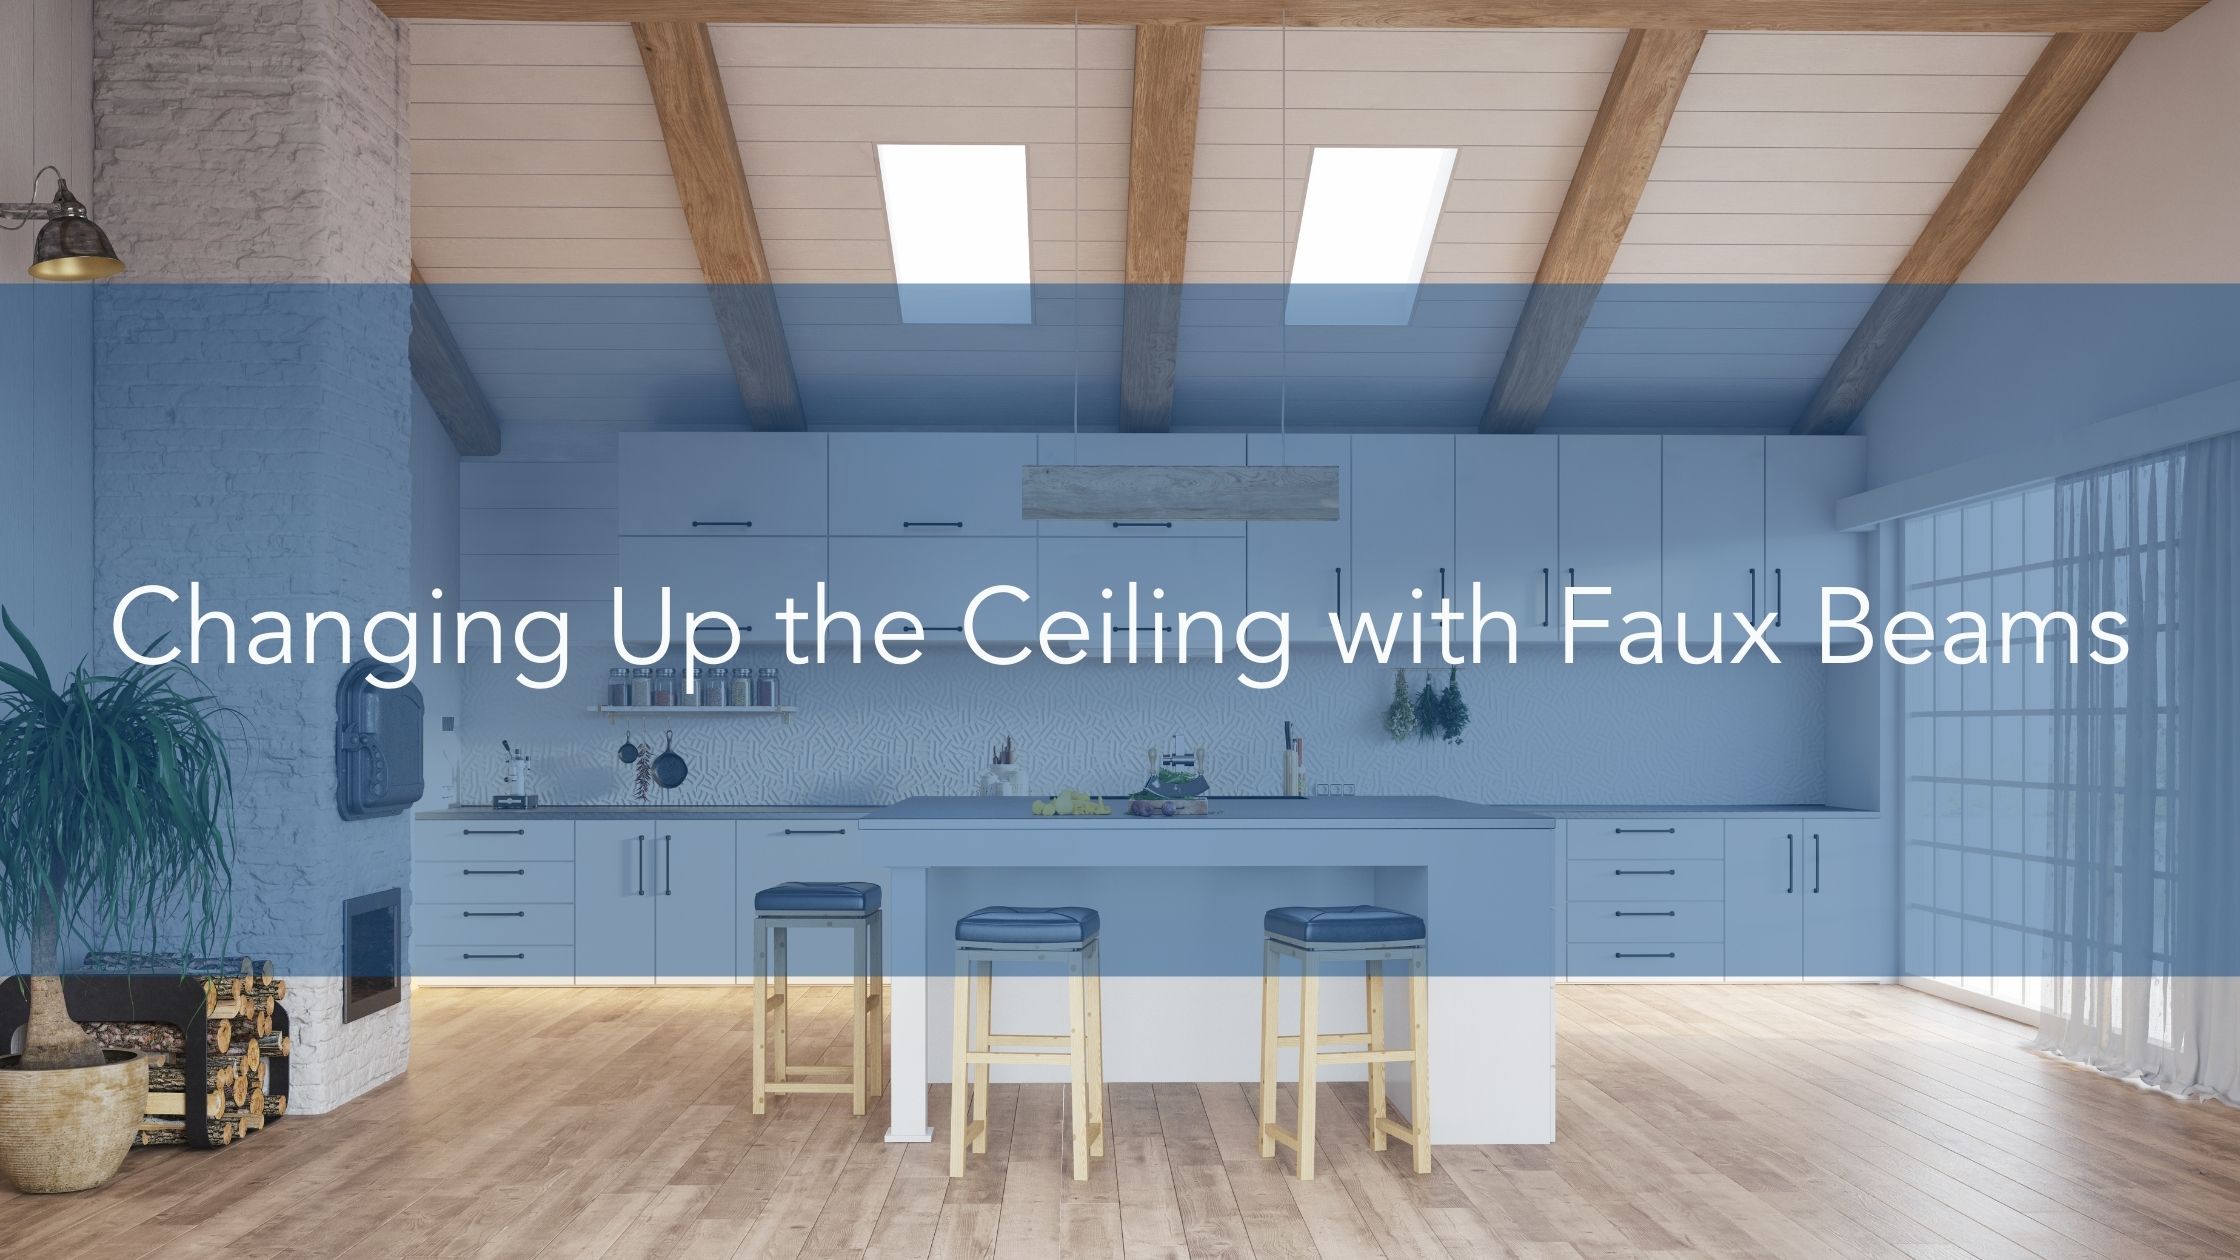 Changing Up the Ceiling with Faux Beams